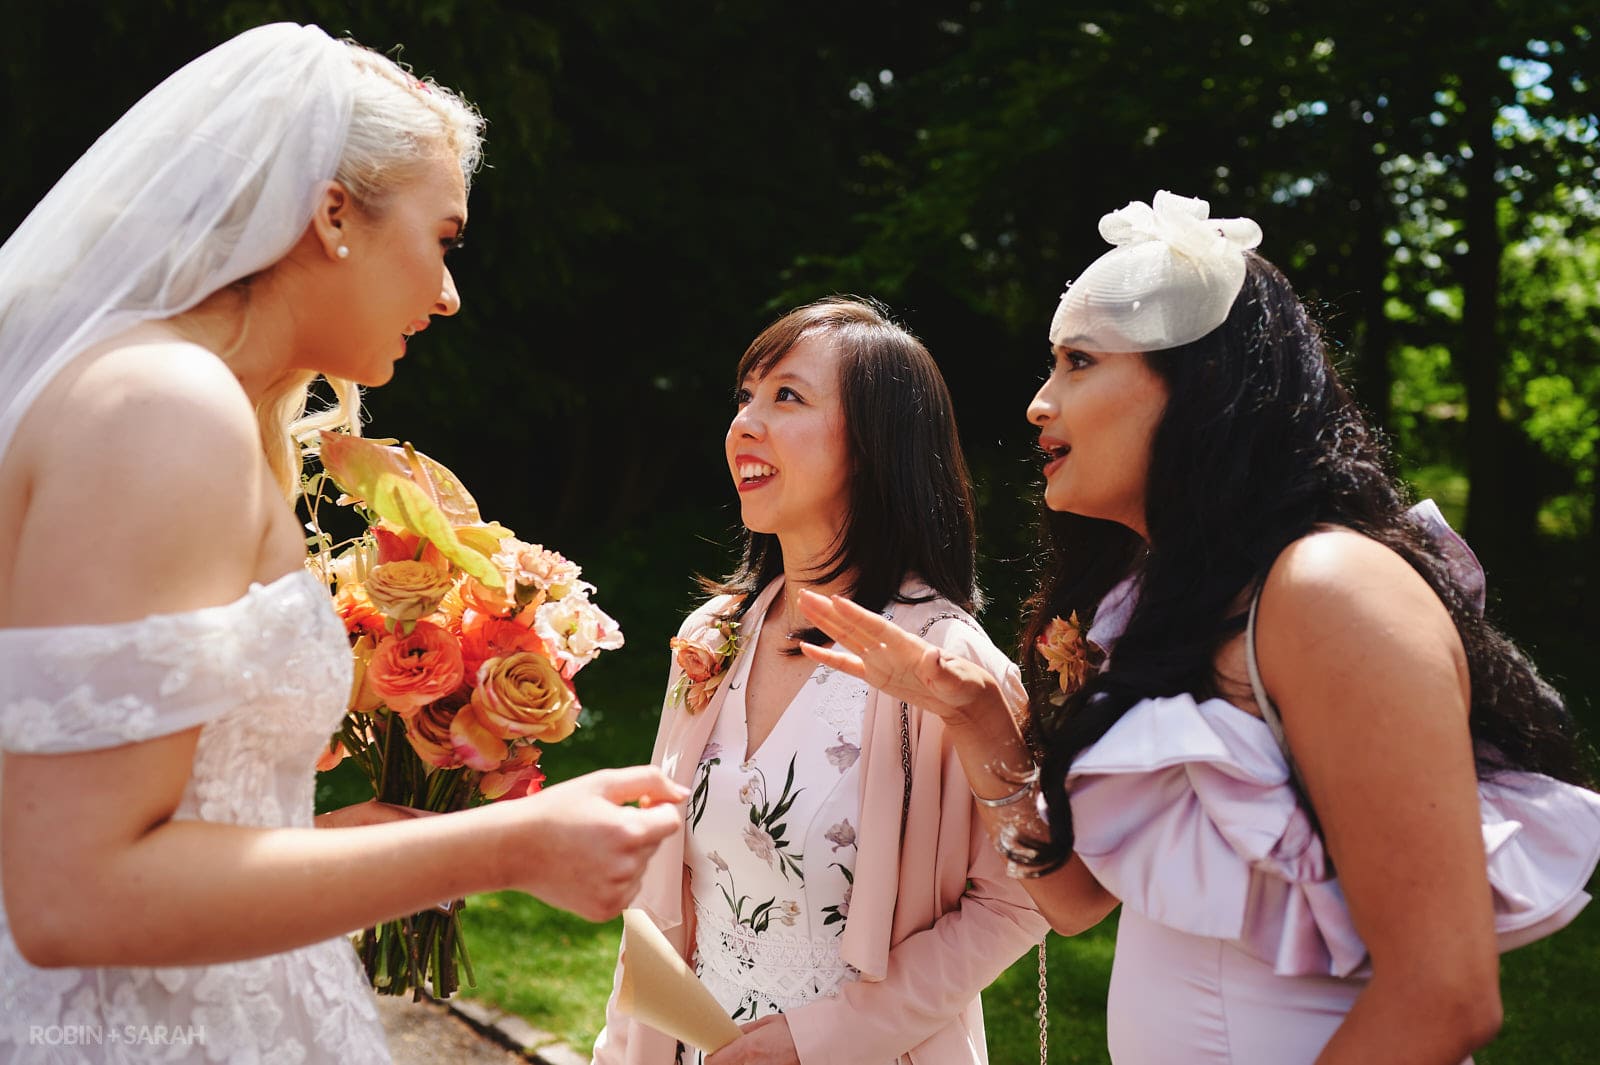 Bride greets wedding guests after church service